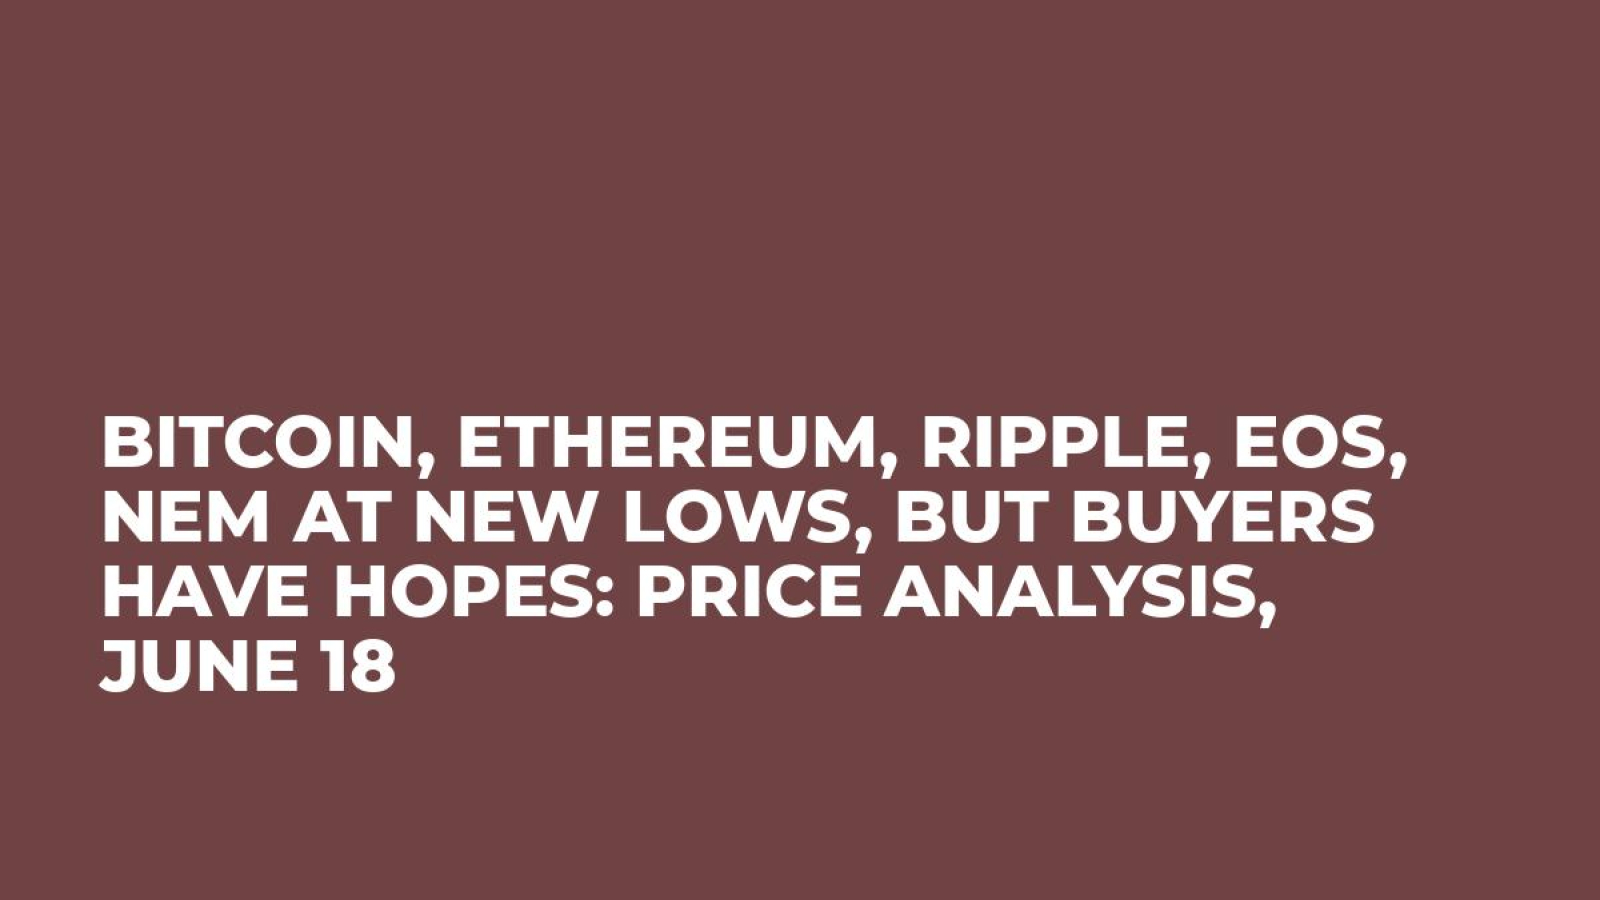 Bitcoin, Ethereum, Ripple, EOS, NEM at New Lows, But Buyers Have Hopes: Price Analysis, June 18